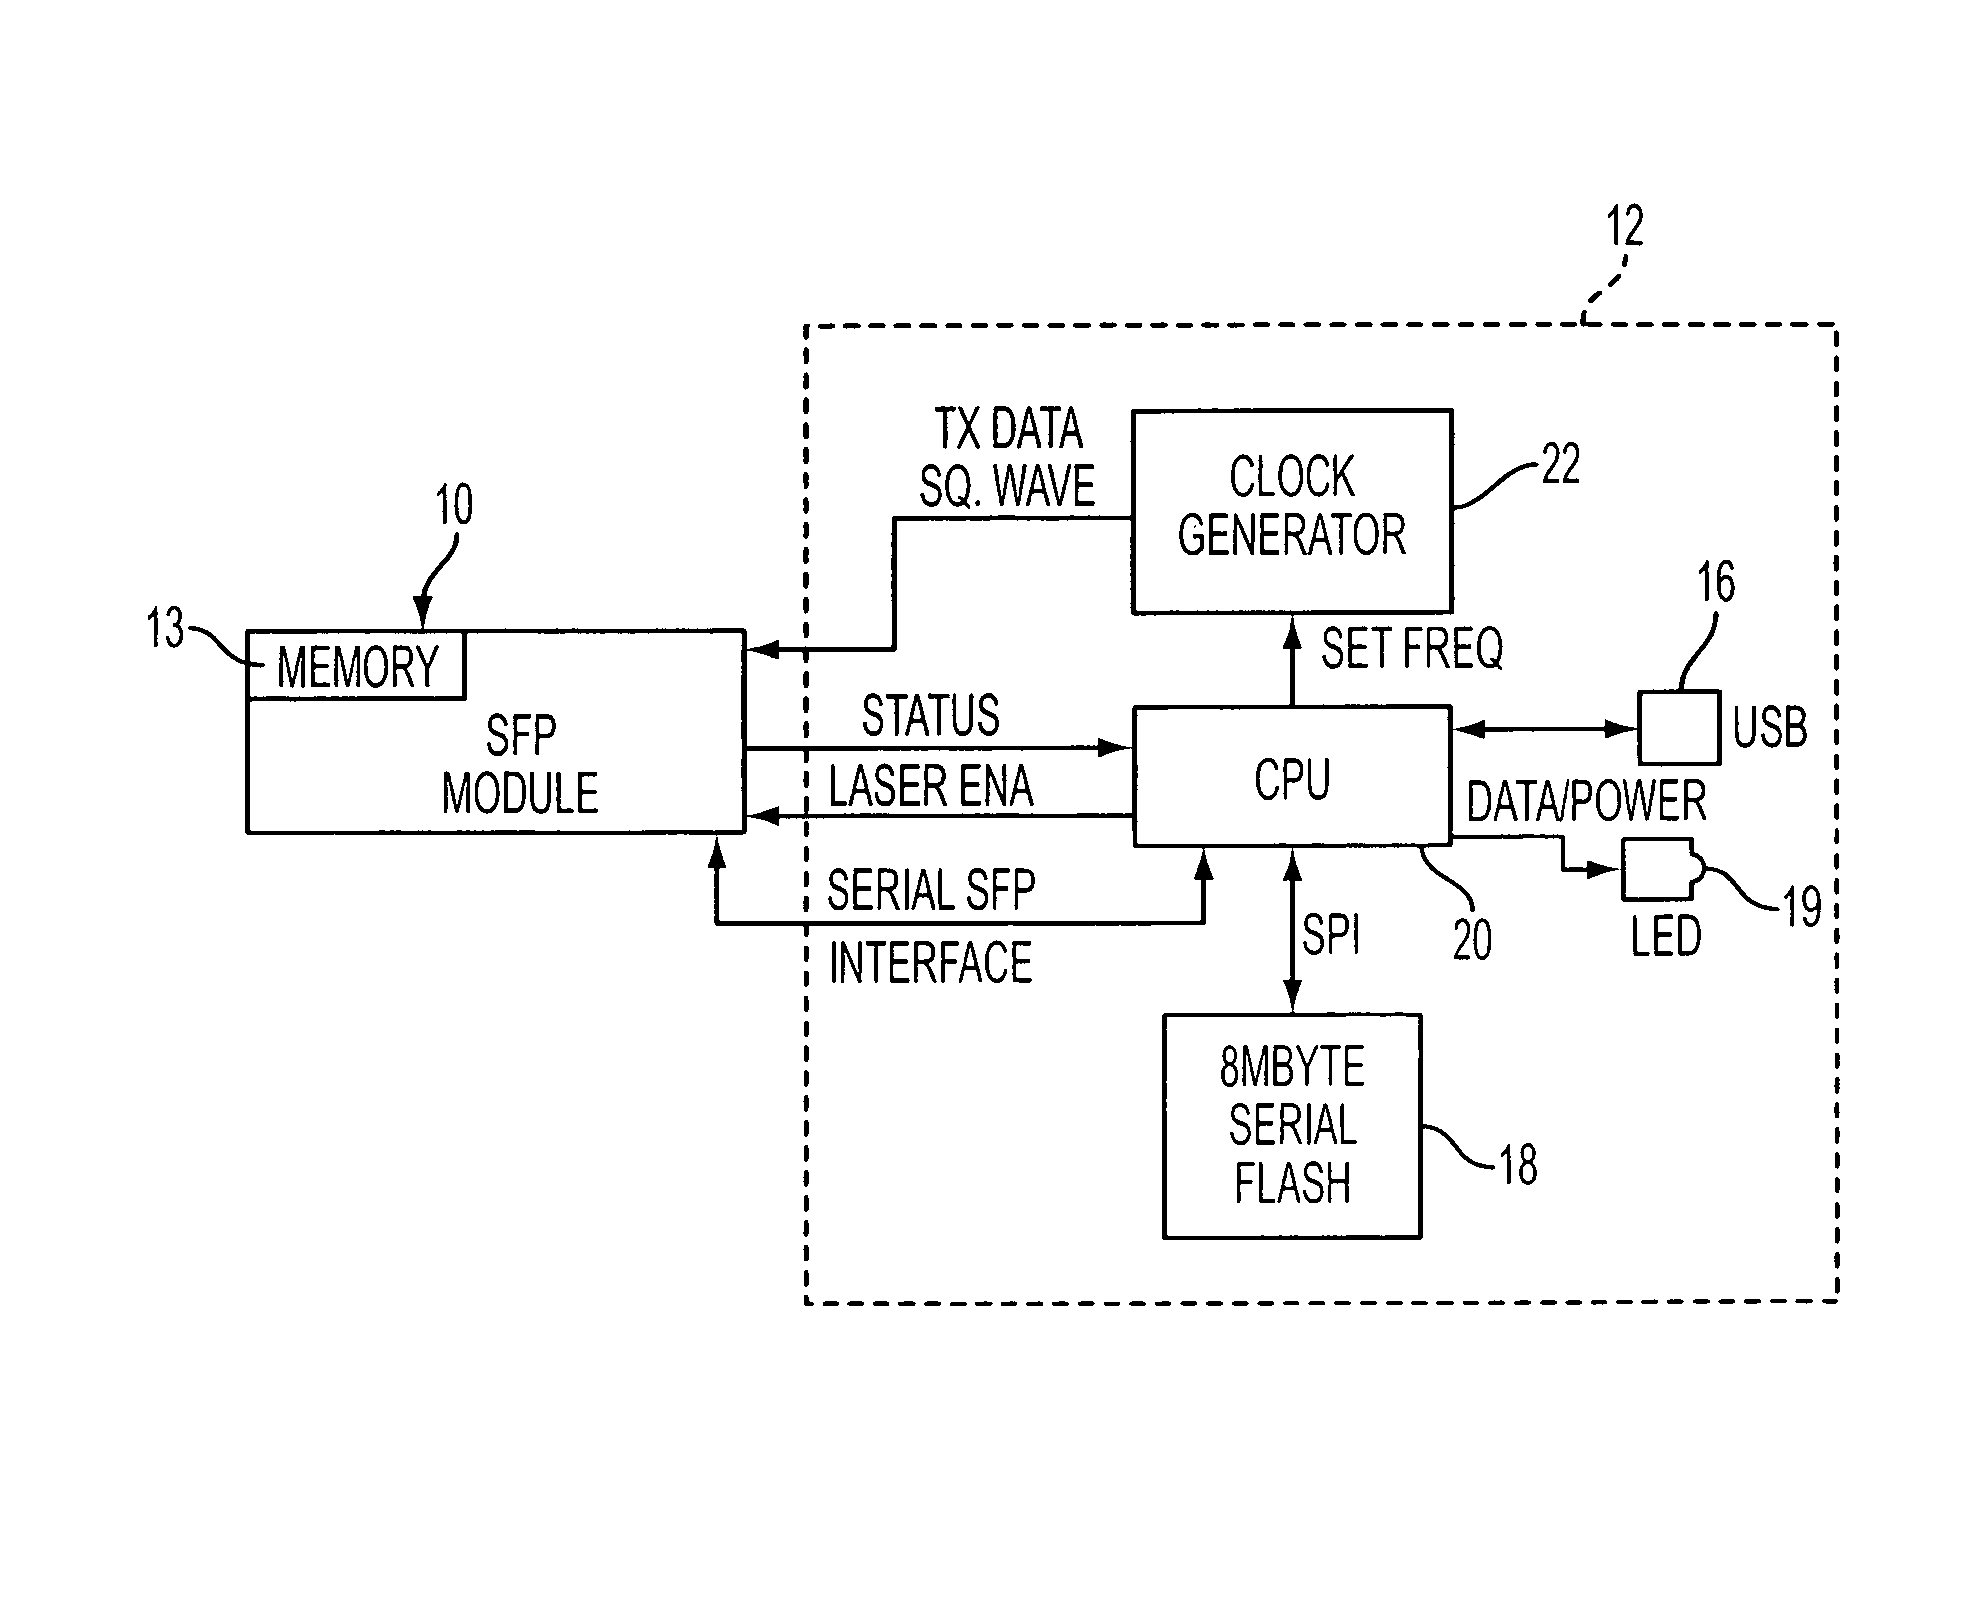 Small form factor pluggable (SFP) checking device for reading from and determining type of inserted SFP transceiver module or other optical device